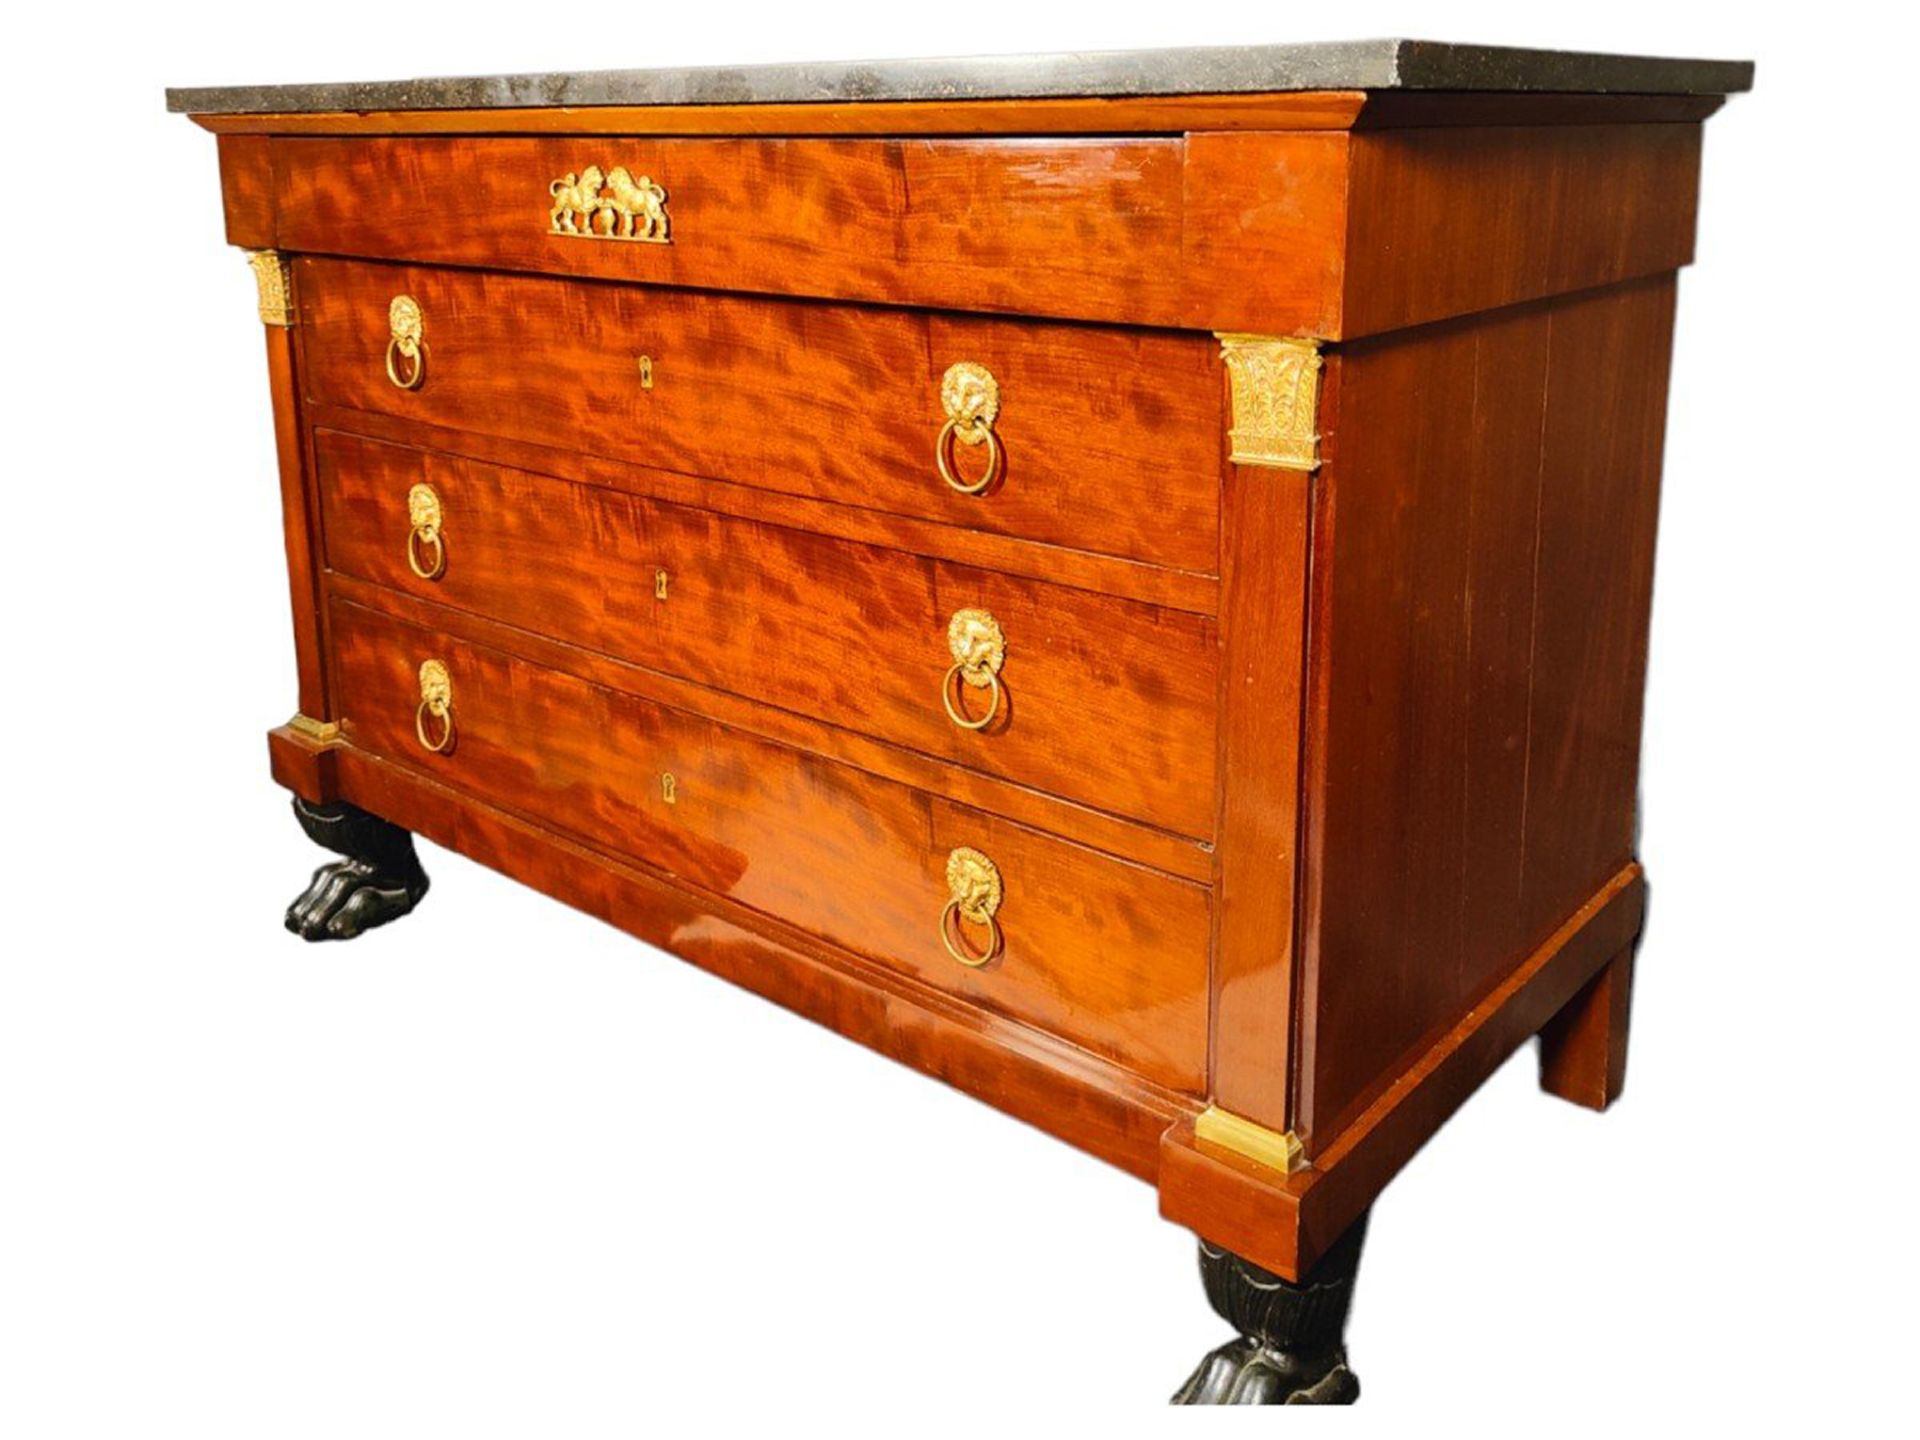 19th century empire chest of drawers, French work - Image 4 of 5